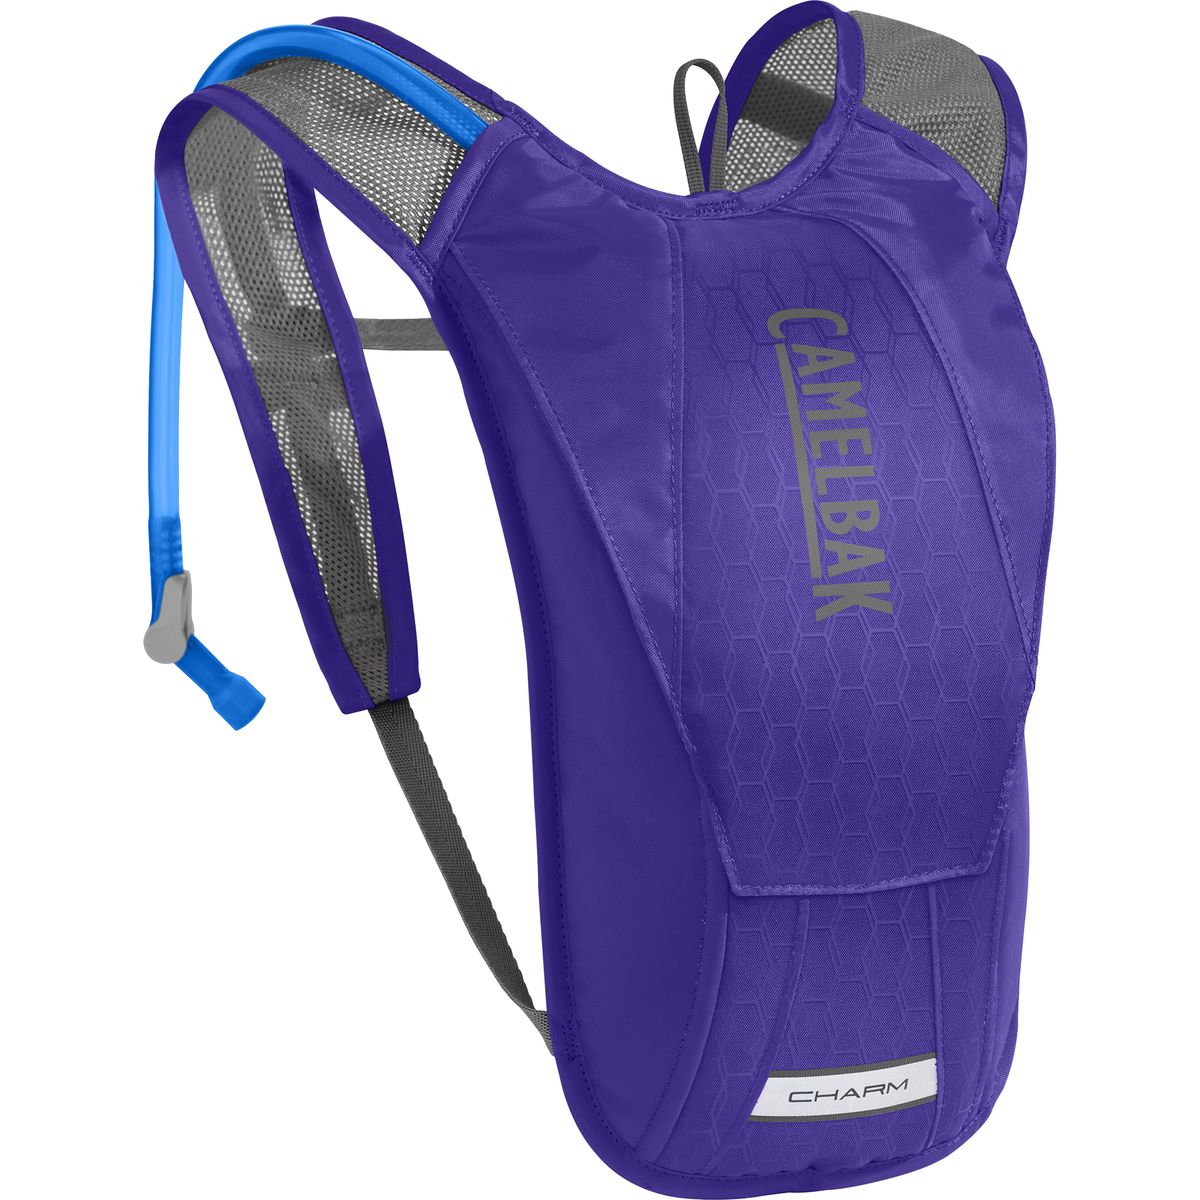 CamelBak Charm Hydration Backpack 92cu in Womens